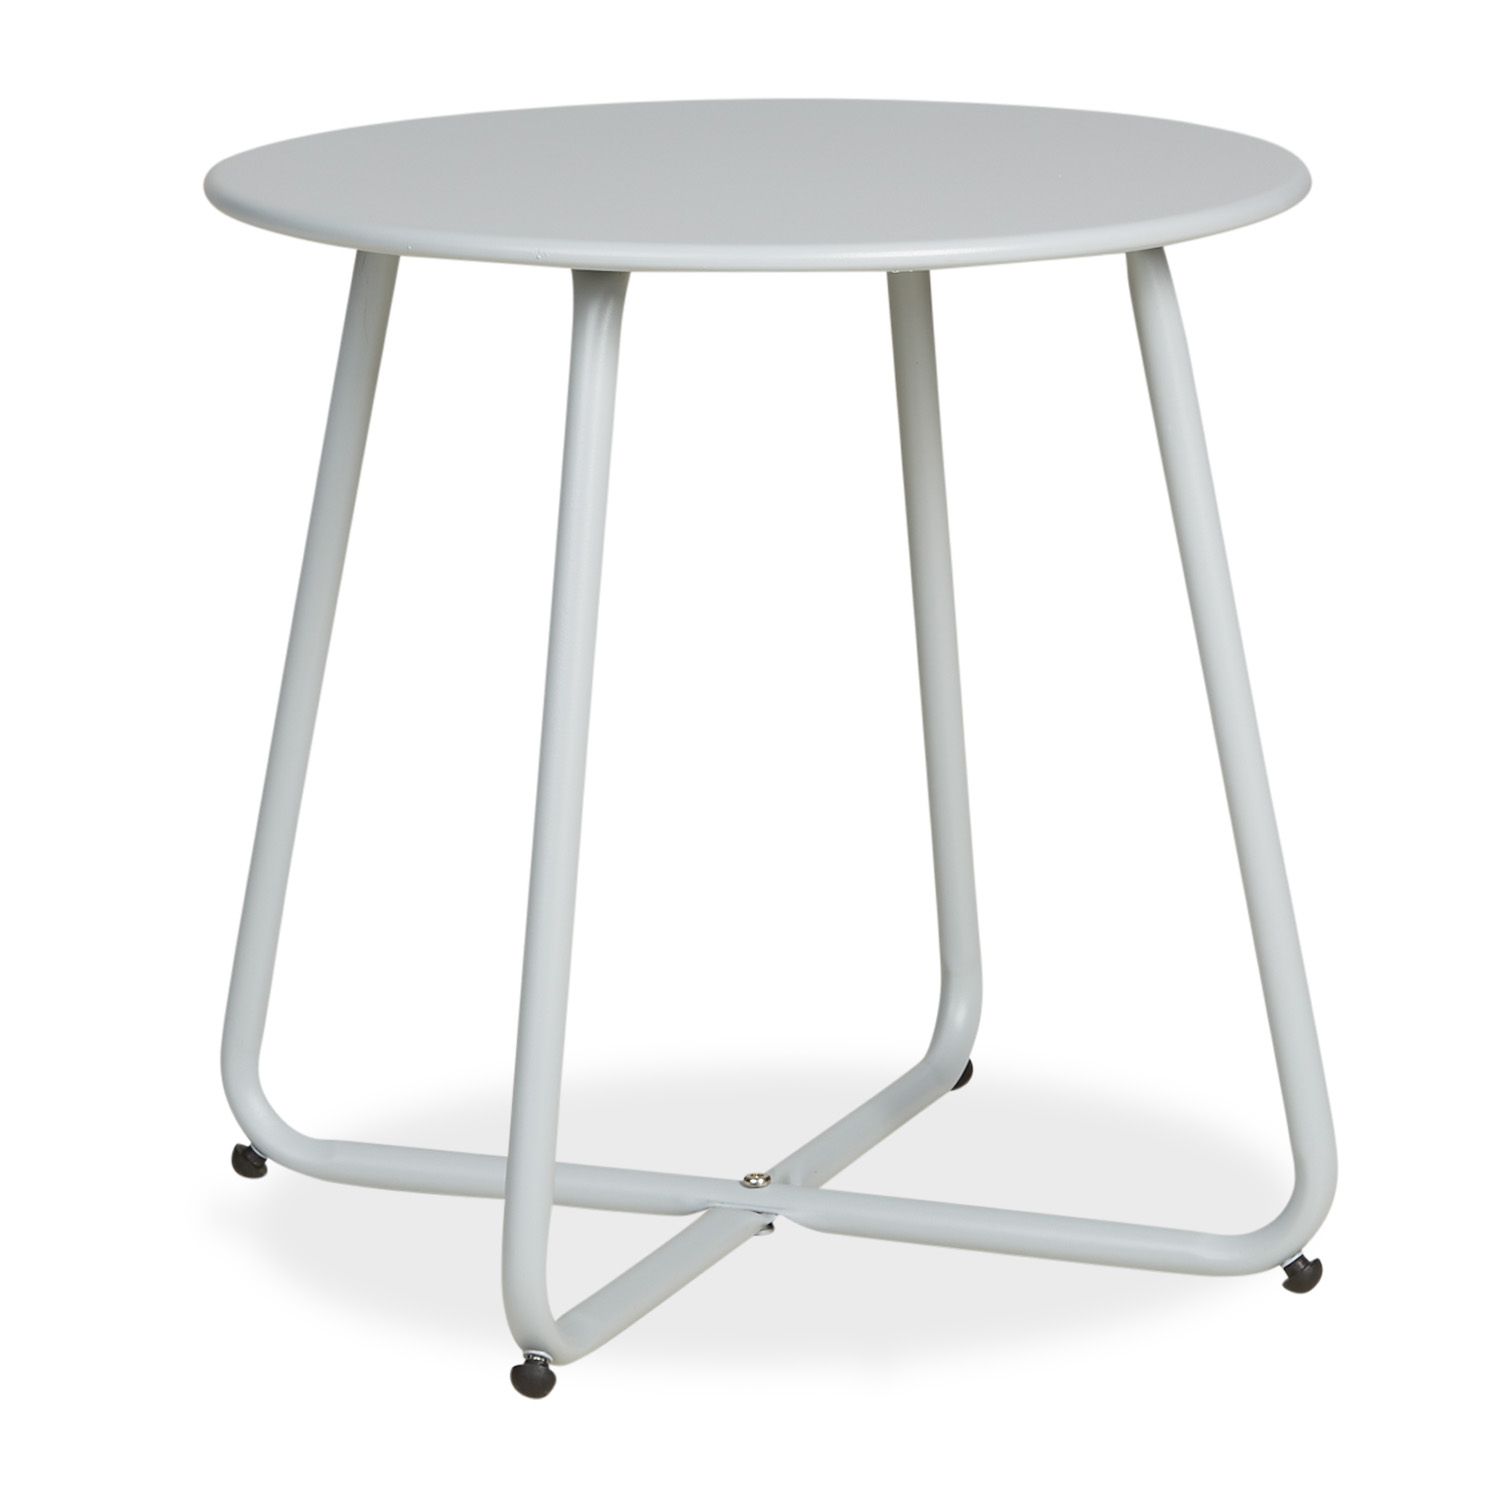 Coffee table Side table Round Garden Table Grey Metal Small table Outdoor table Bistro table